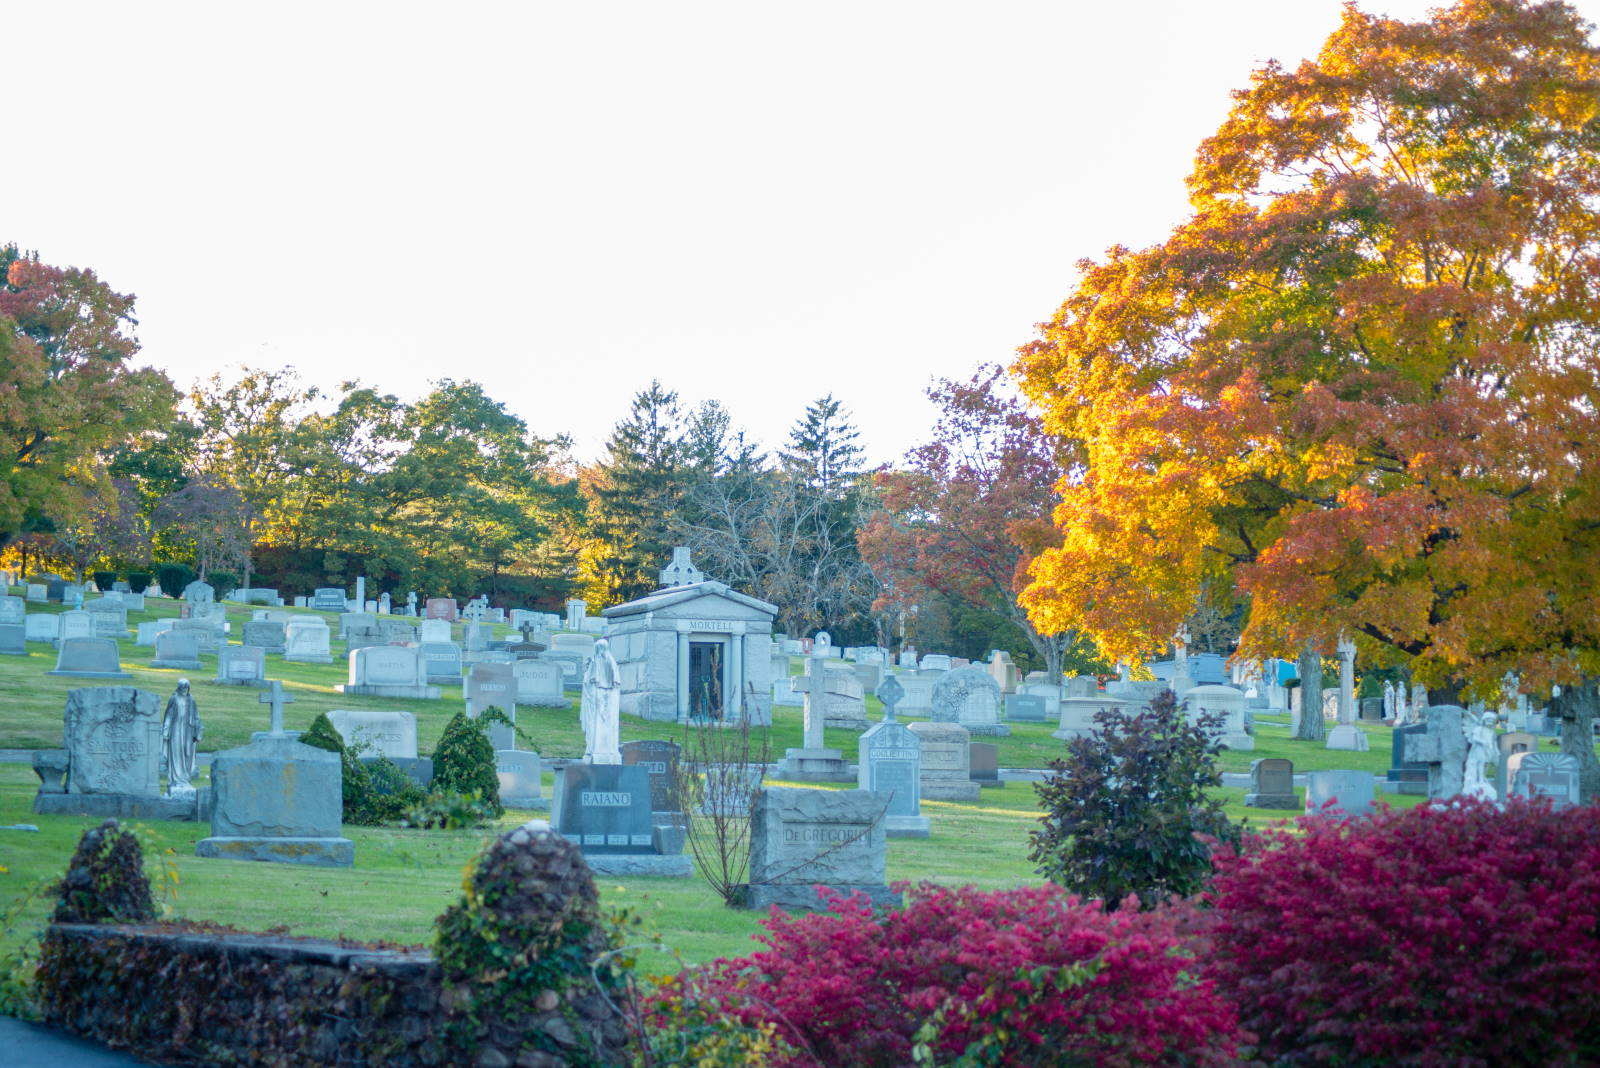 Exterior Photo of Saint Lawrence Cemetery
280 Derby Ave
West Haven, CT 06516